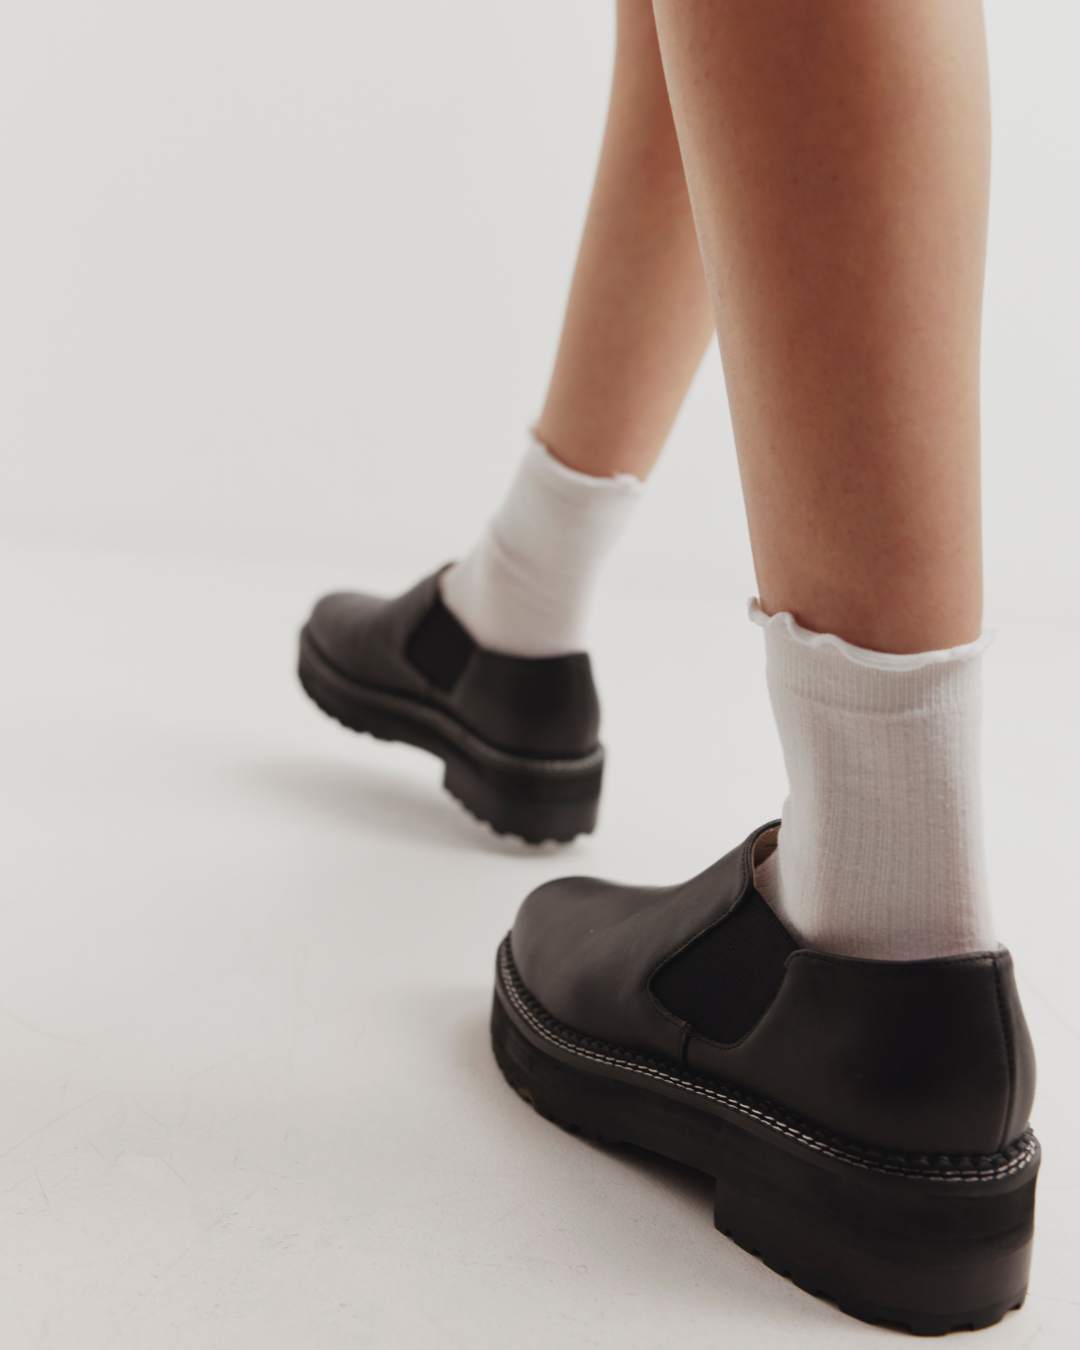 Woman wearing black ankle boots with white socks